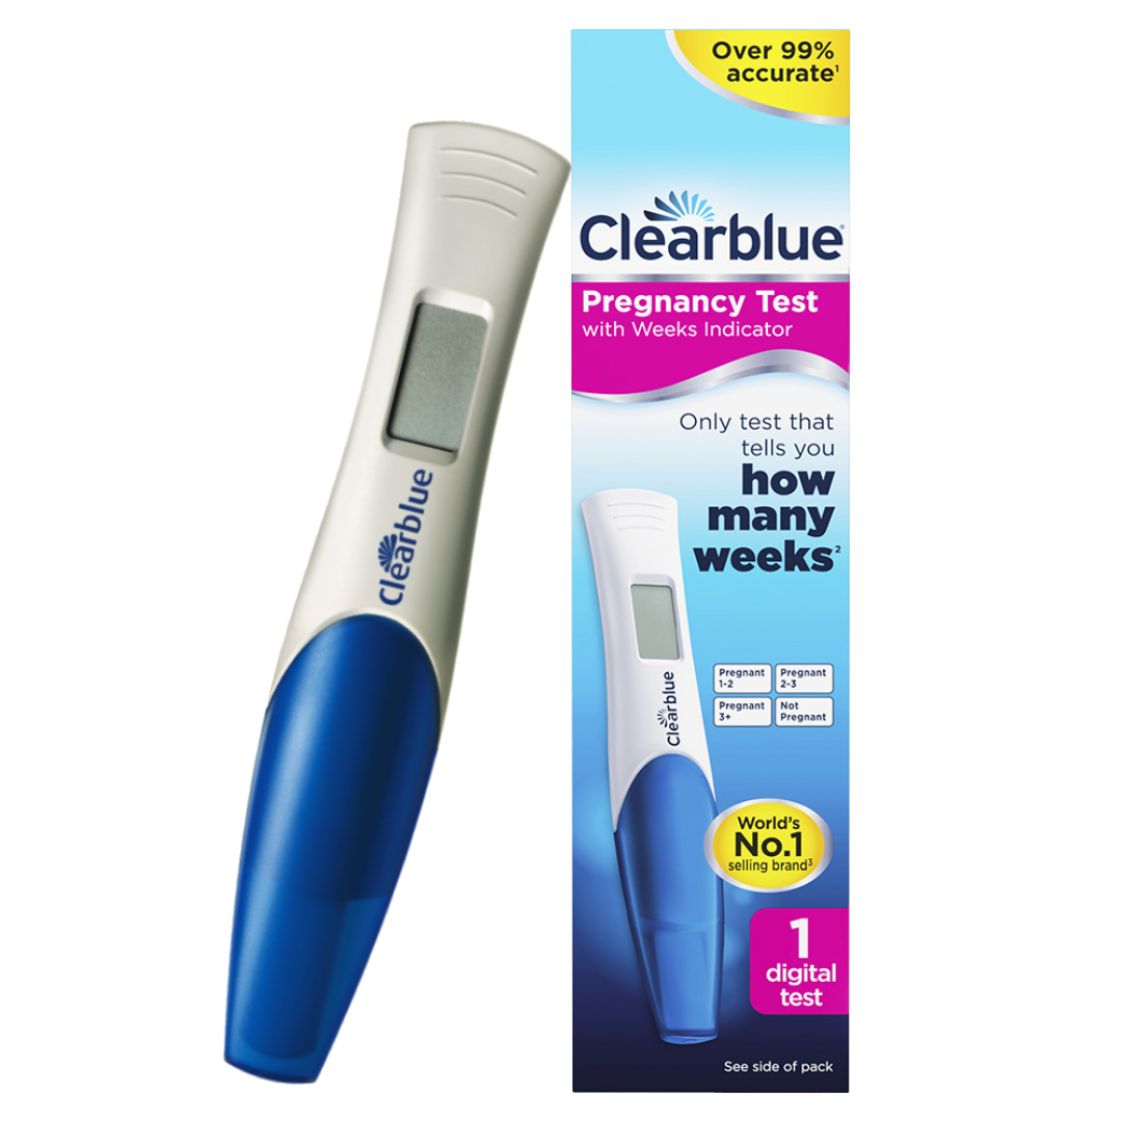 Clearblue Digital Pregnancy Test 1s - Guardian Online Malaysia